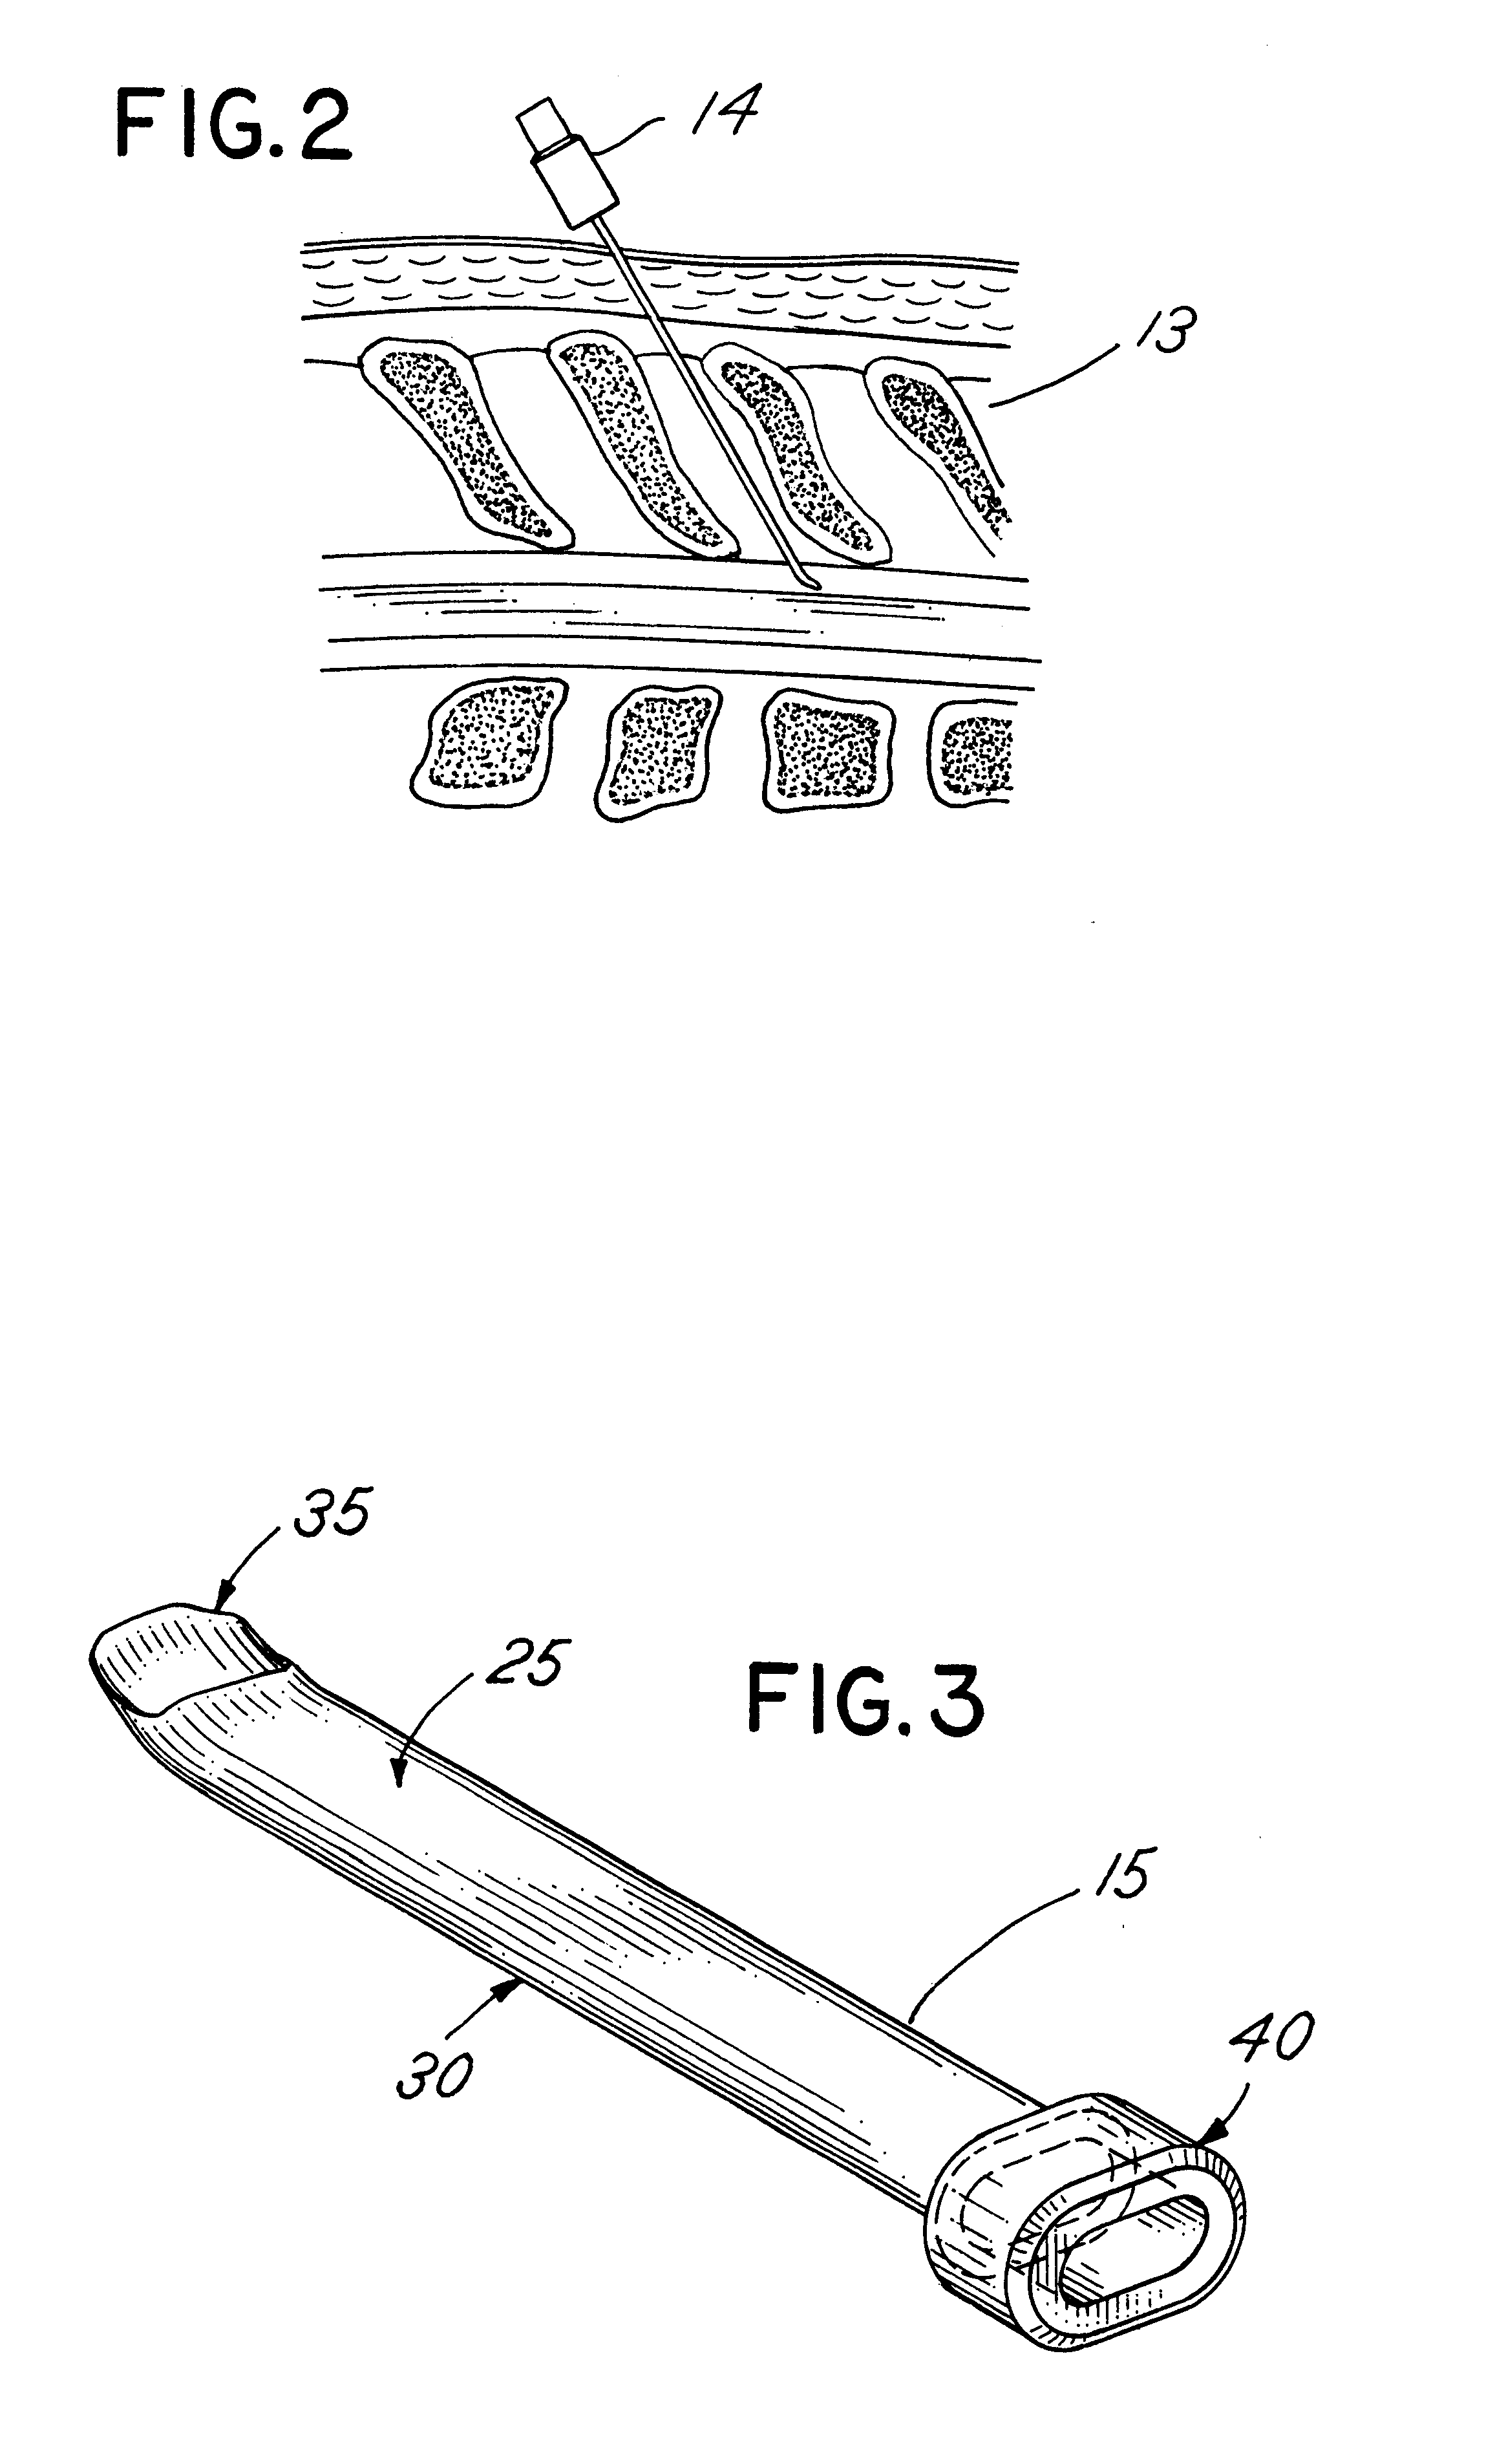 Apparatus and method for percutaneous implant of a paddle style lead